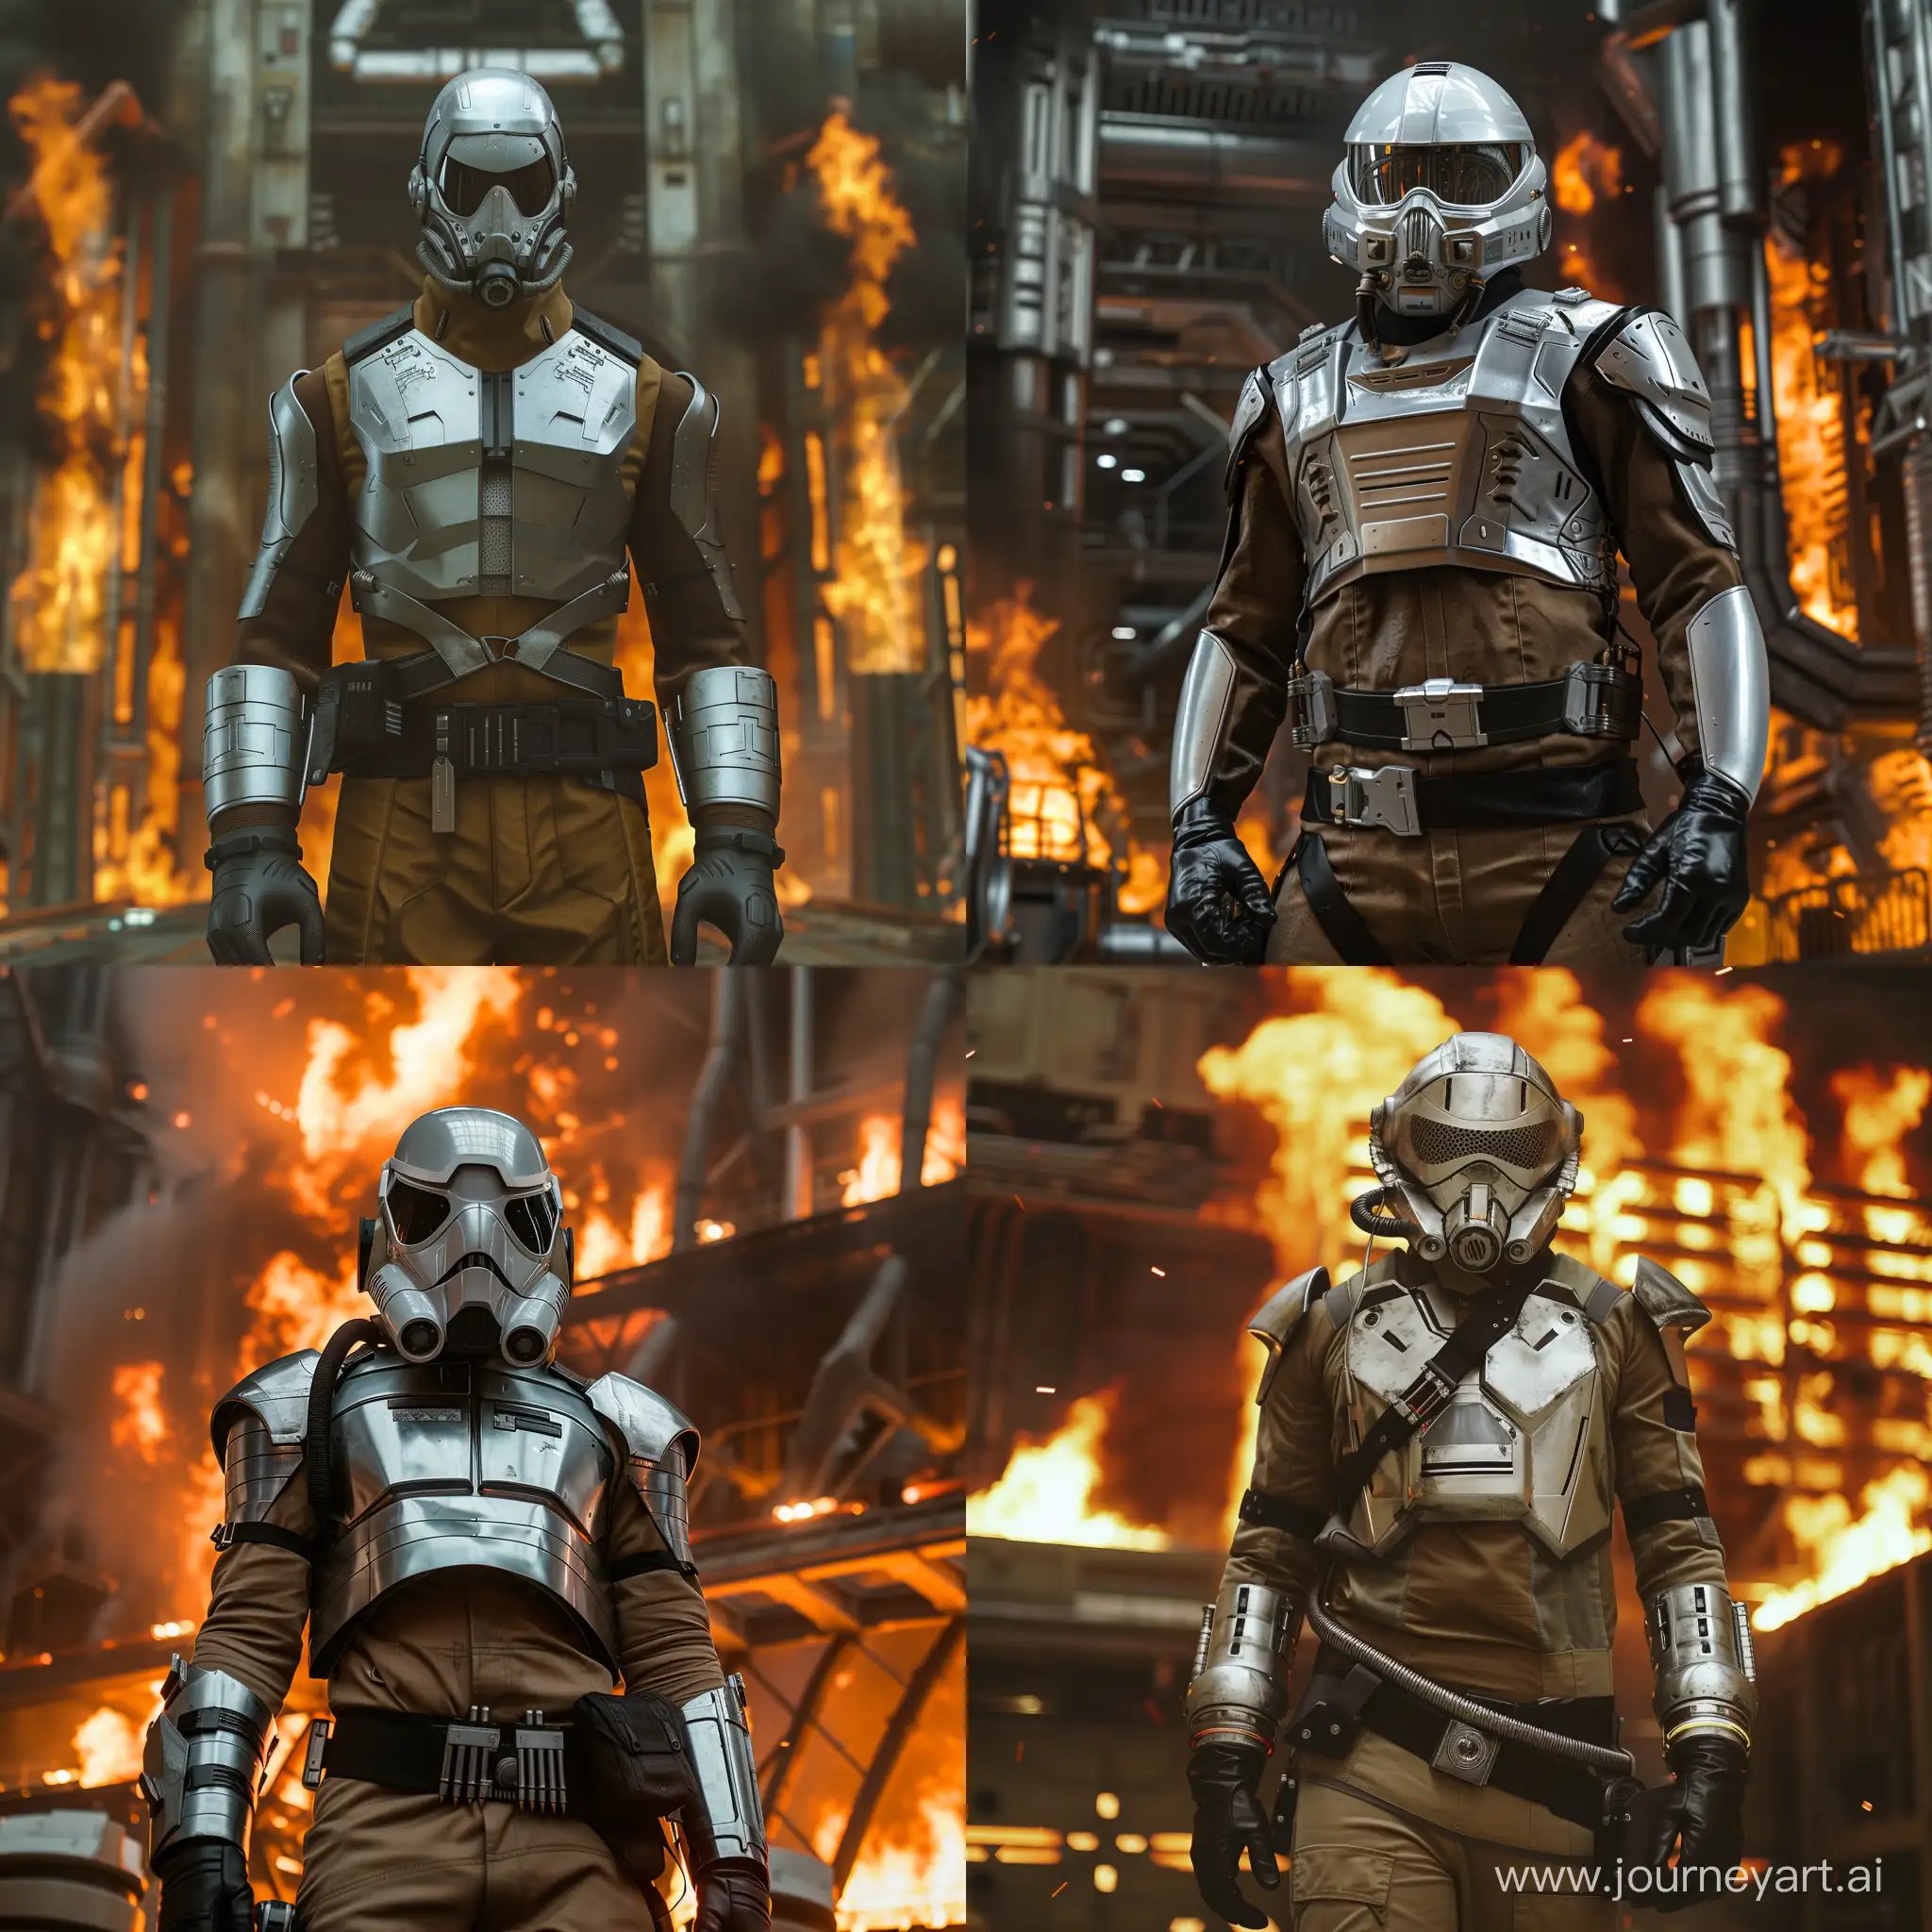 A tall man with broad shoulders wearing a silver mask with a visor and a respirator, wearing a suit of silver sci-fi armor over a brown bodysuit with black rubber gloves. He wears a belt with weapons
Futuristic, militarism, Closed Face, Visor, Respirator.

Burning dark space station hall in the background with a large wall of fire.